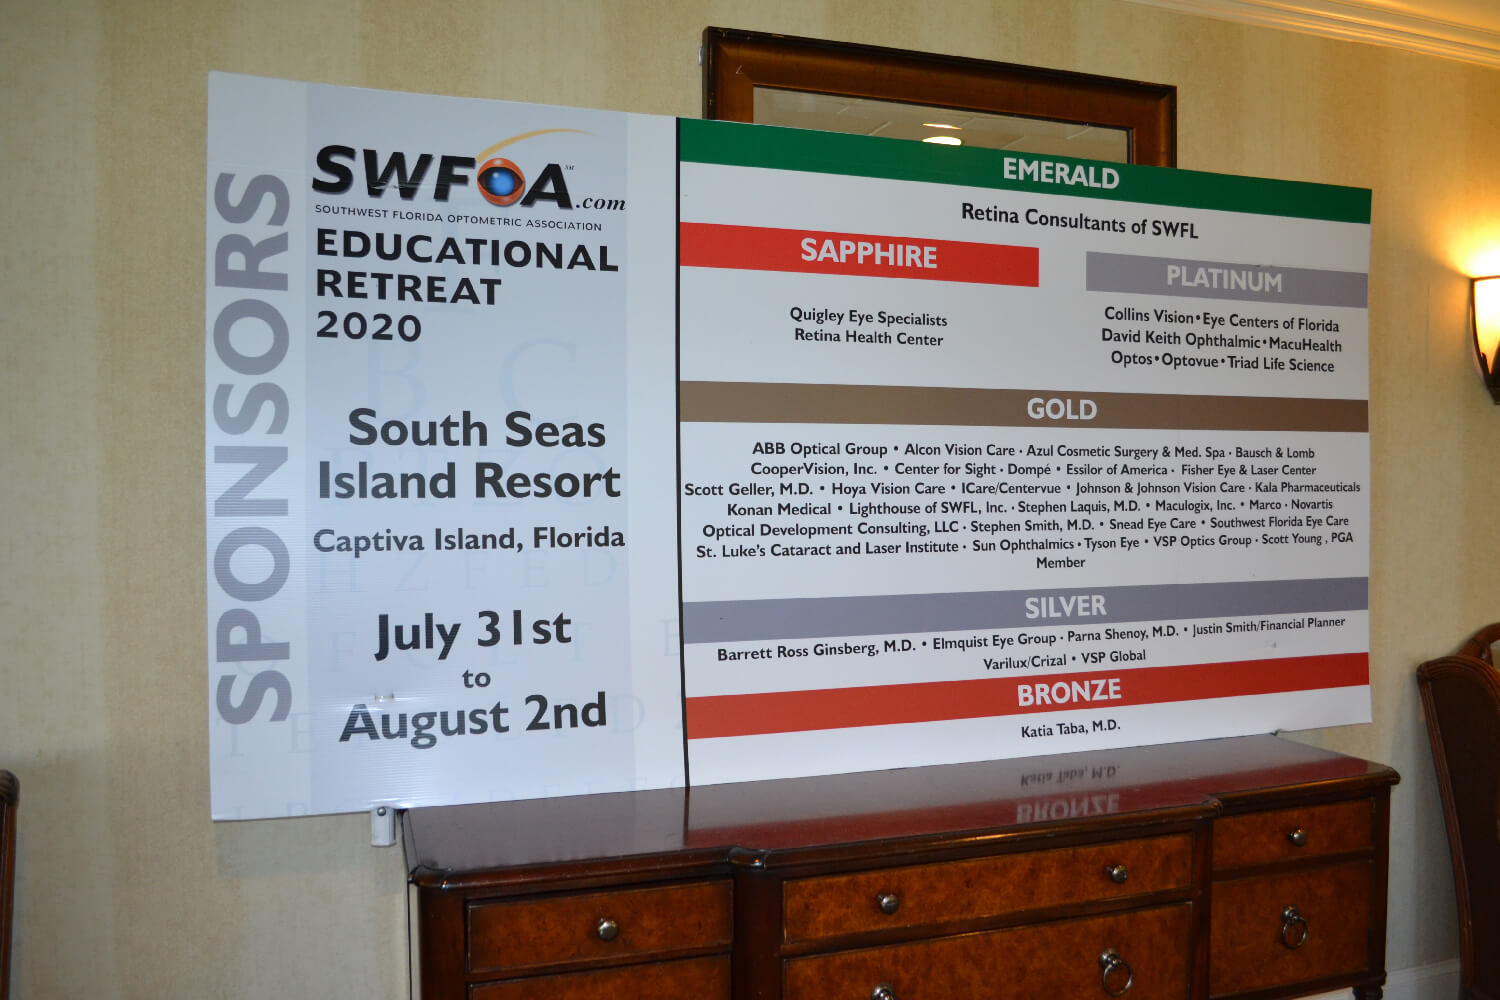 SWFOA Annual Retreat and Conference